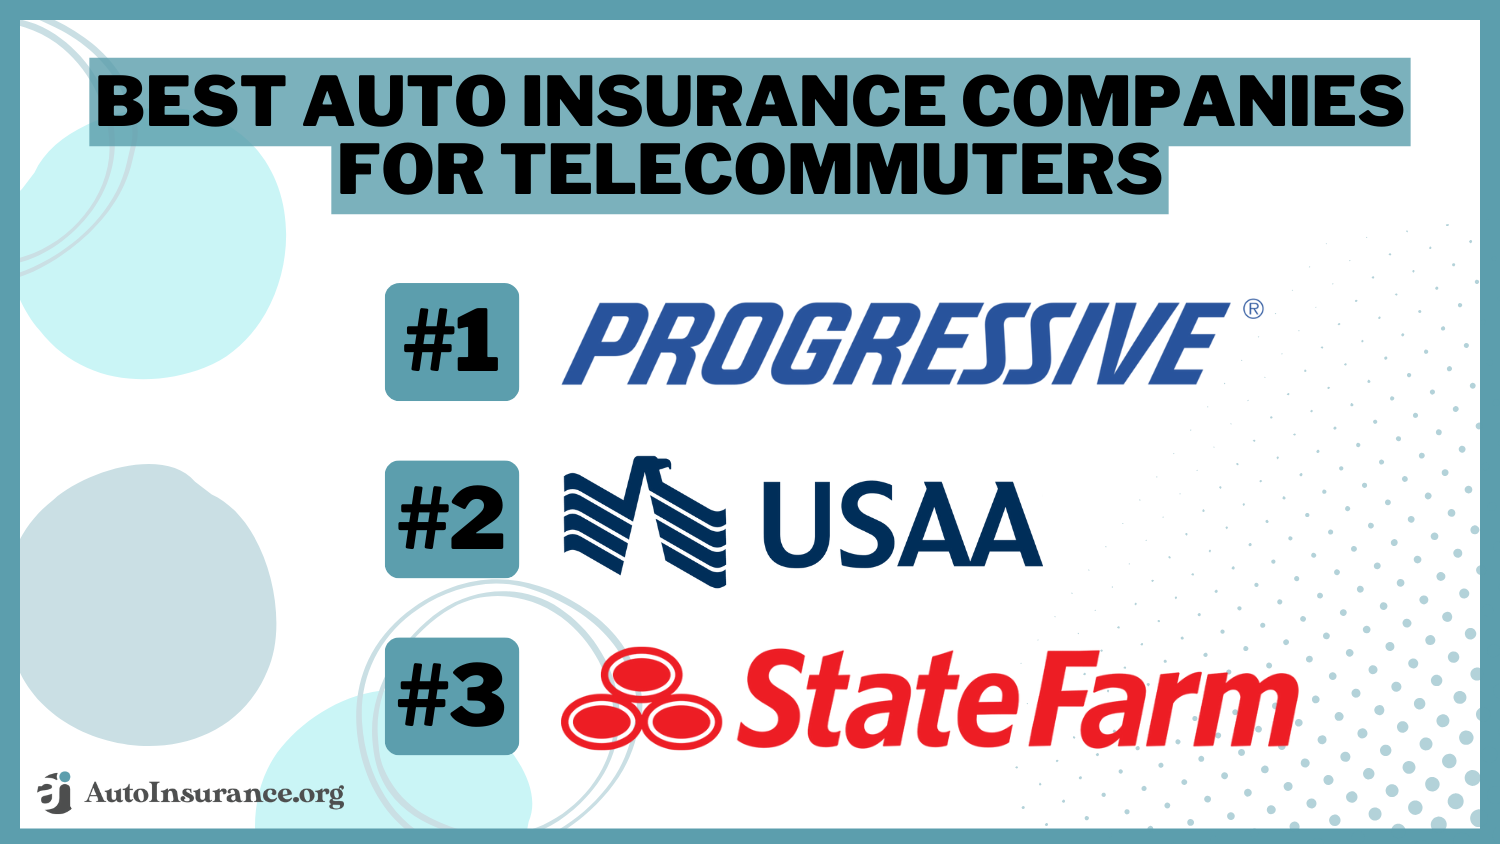 10 Best Auto Insurance Companies for Telecommuters: Progressive, USAA, and State Farm